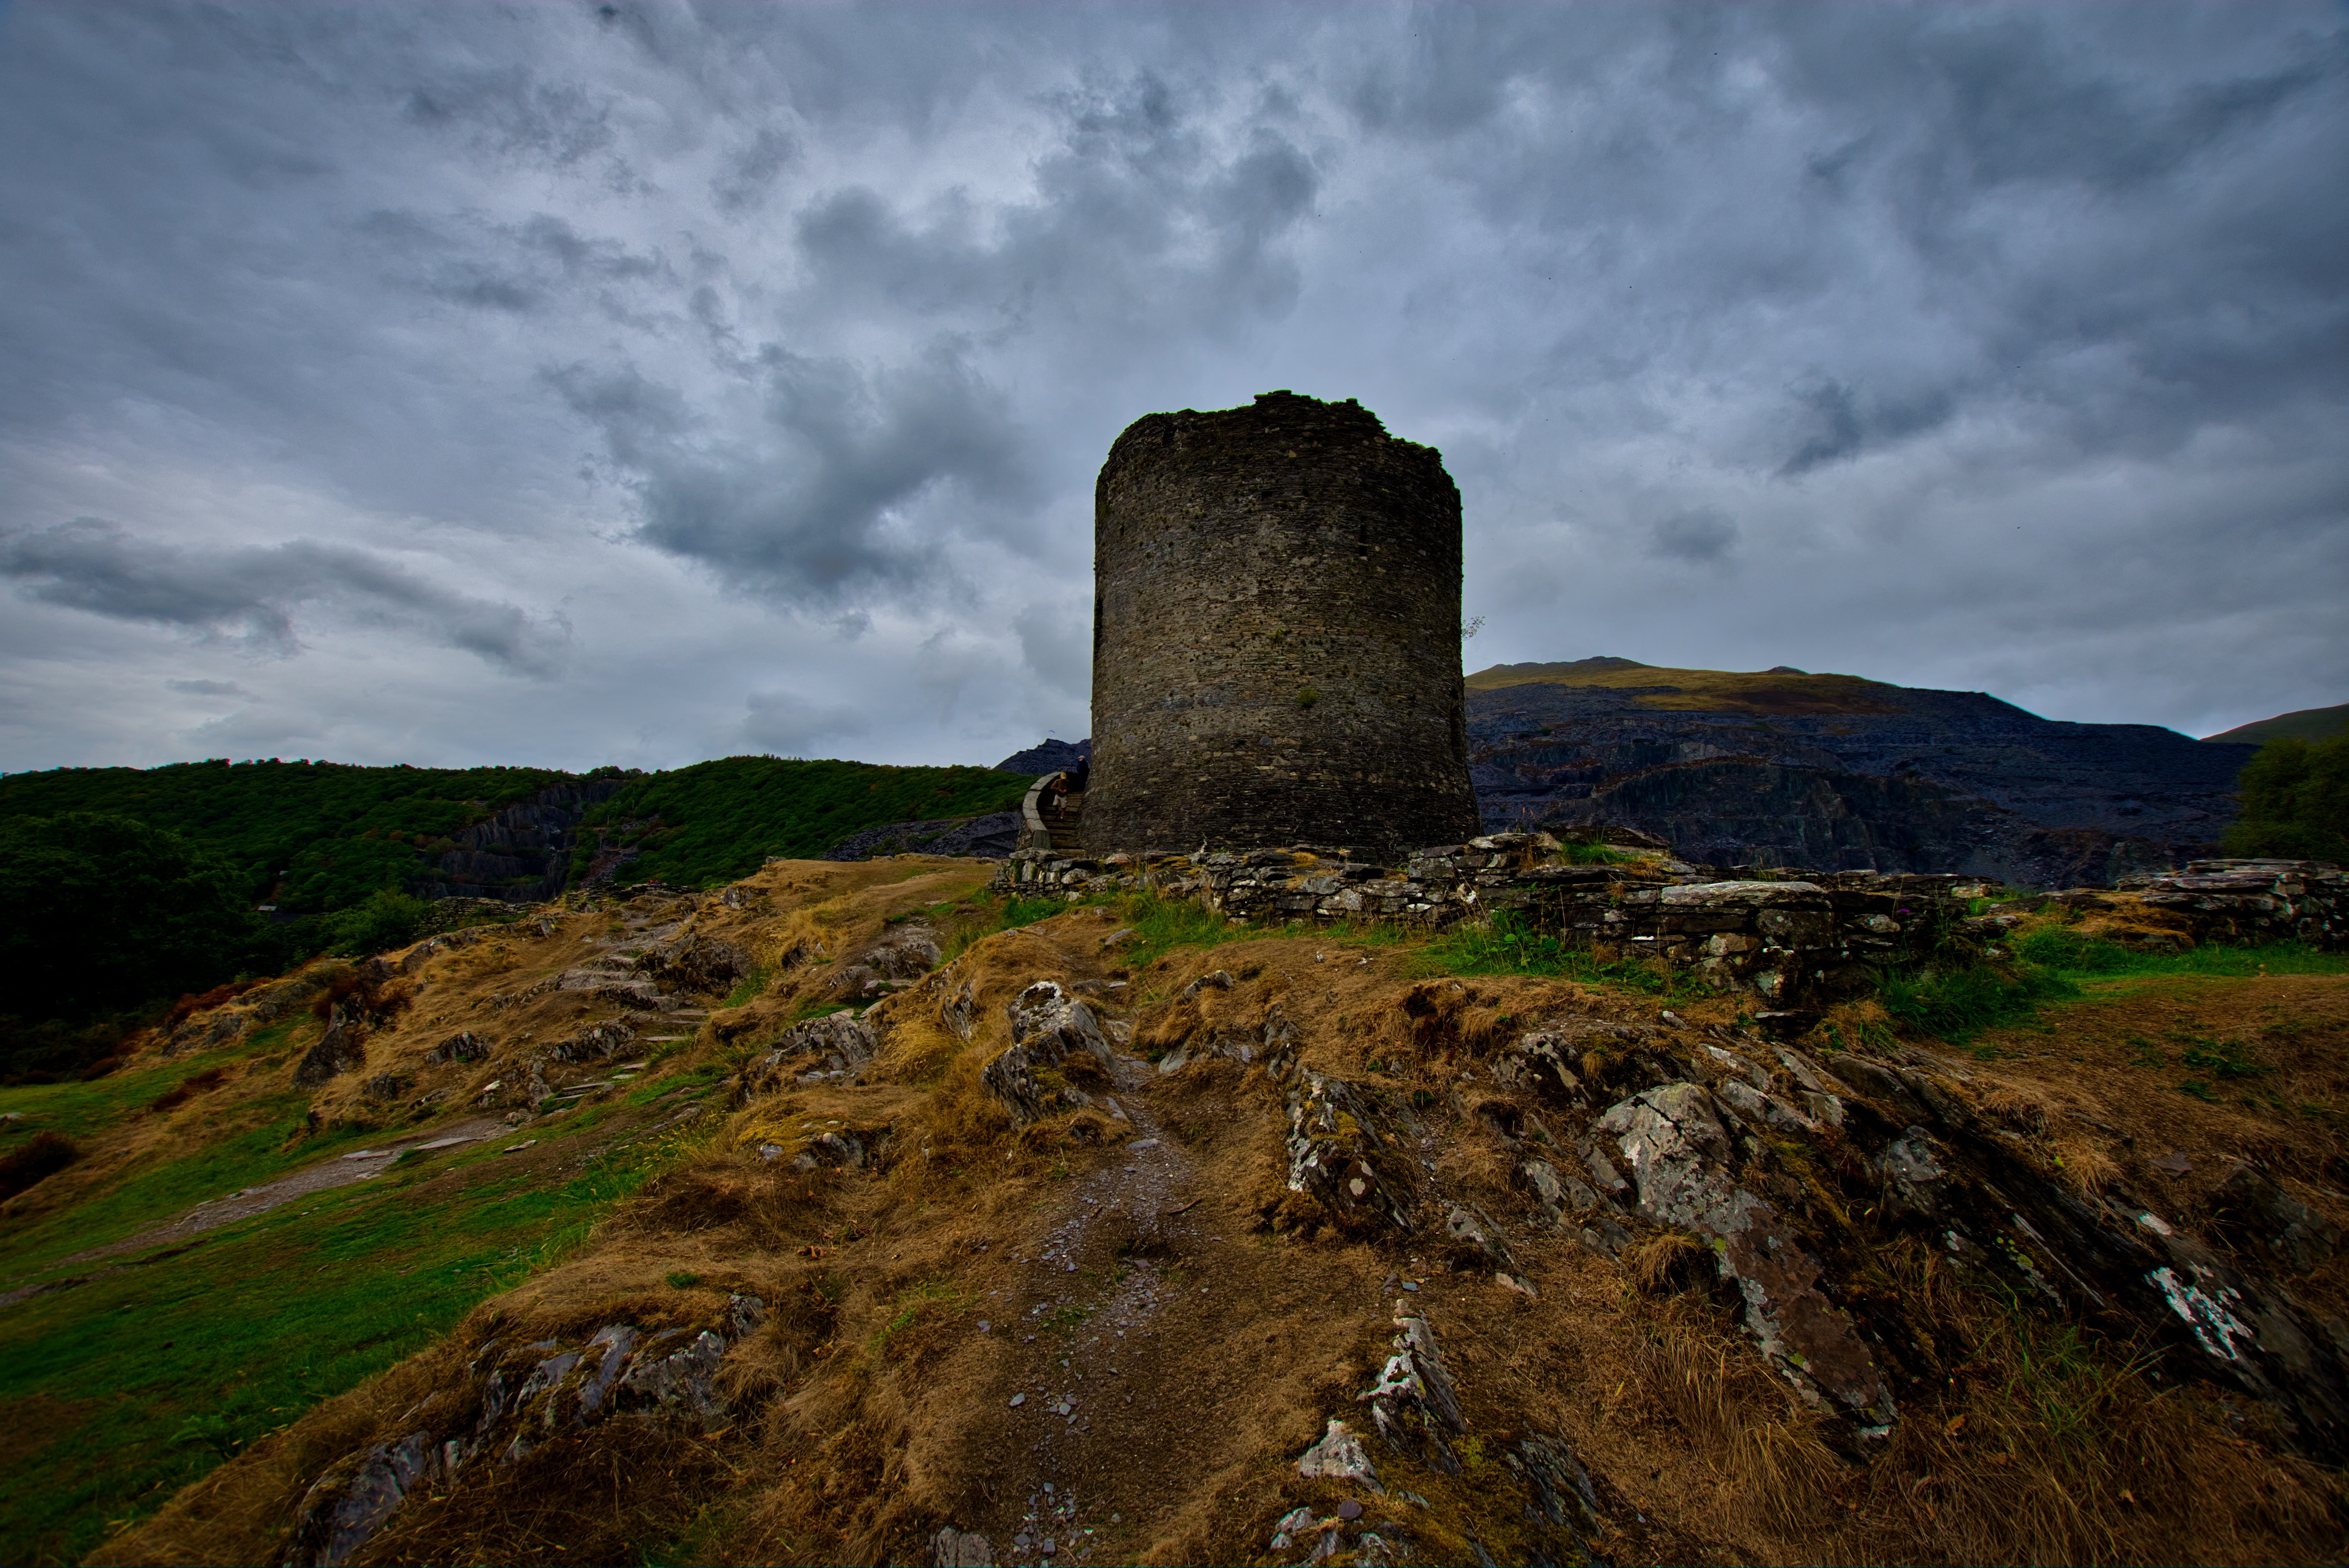 A ruined tower in the centre of the shot, clearly missing the top portion.  In front of the tower is orange-ish tussock through which rocks protrude,  and the remains of the walls that once surrounded the tower. The sky is  overcast, and the whole area looks dark, as though it has just or is about  to rain.